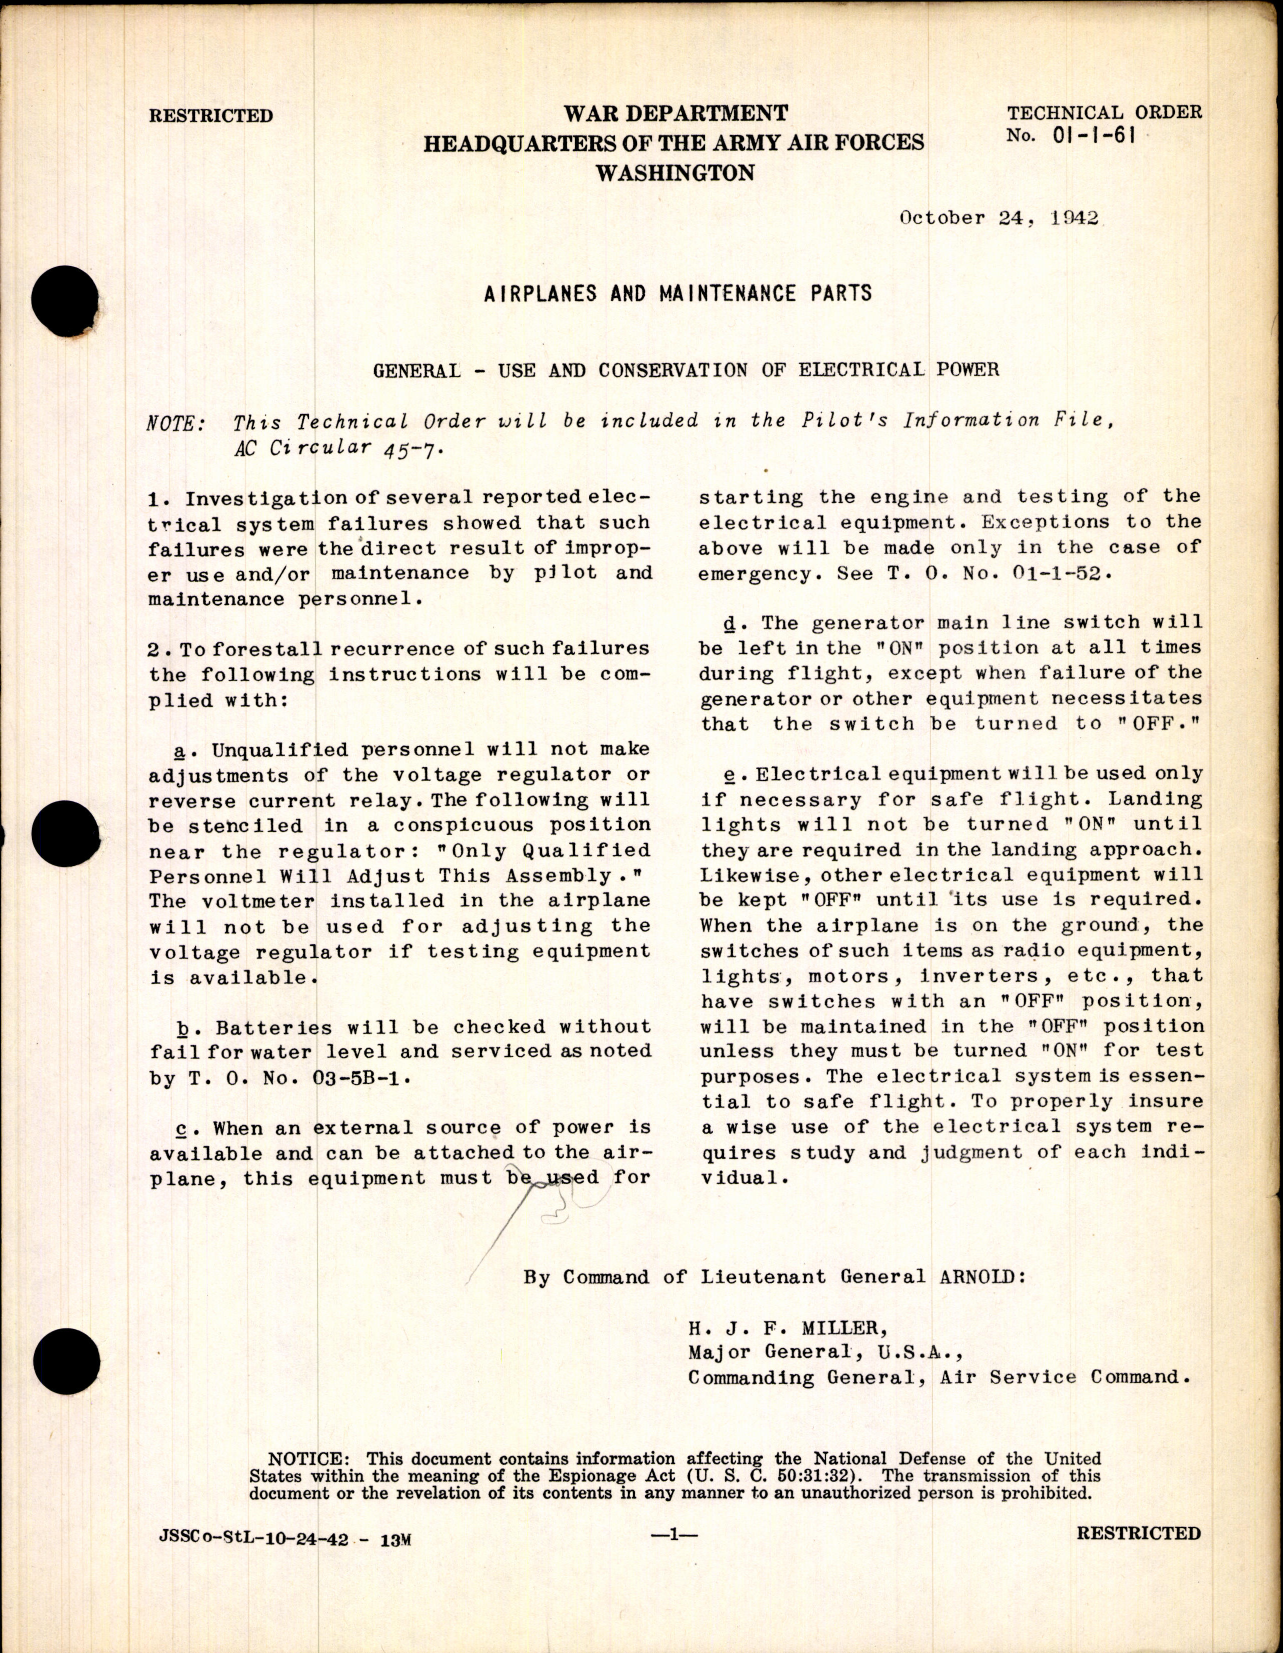 Sample page 1 from AirCorps Library document: Use and Conservation of Electrical Power